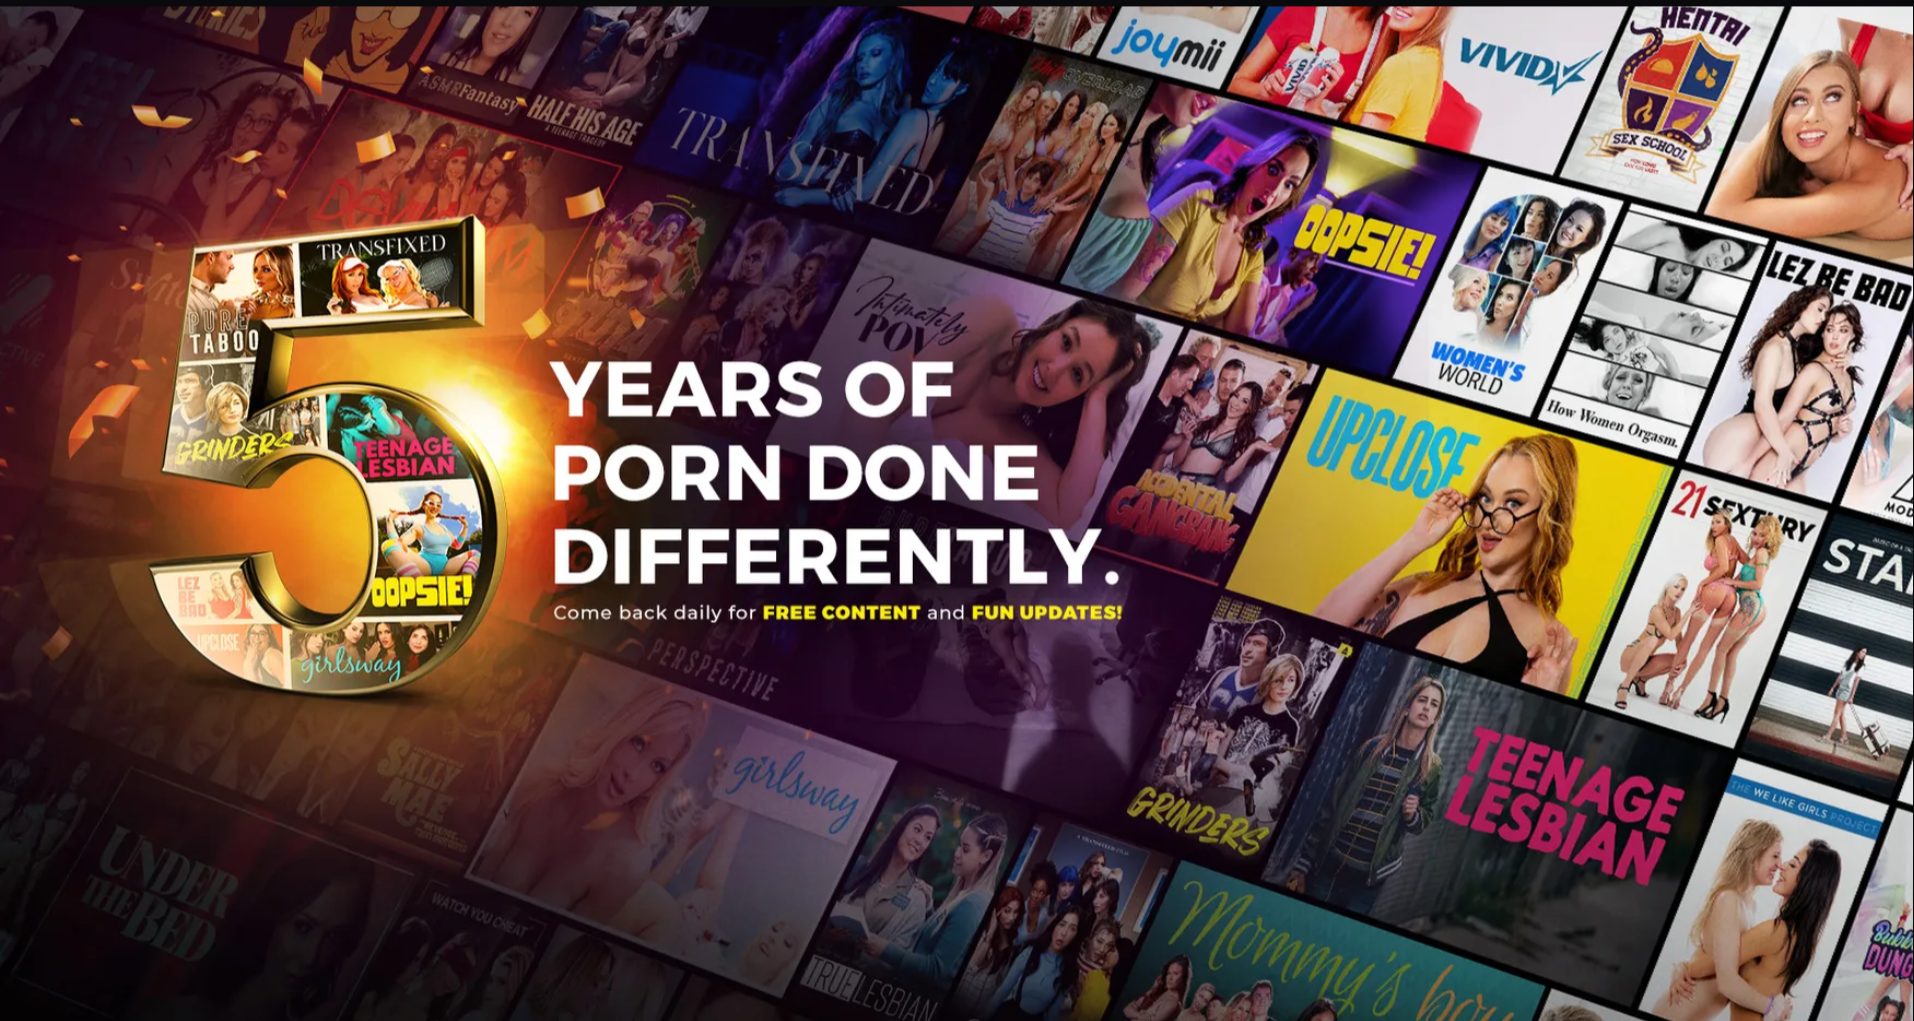 Adult Time Celebrates Five Years of ‘Porn Done Differently’